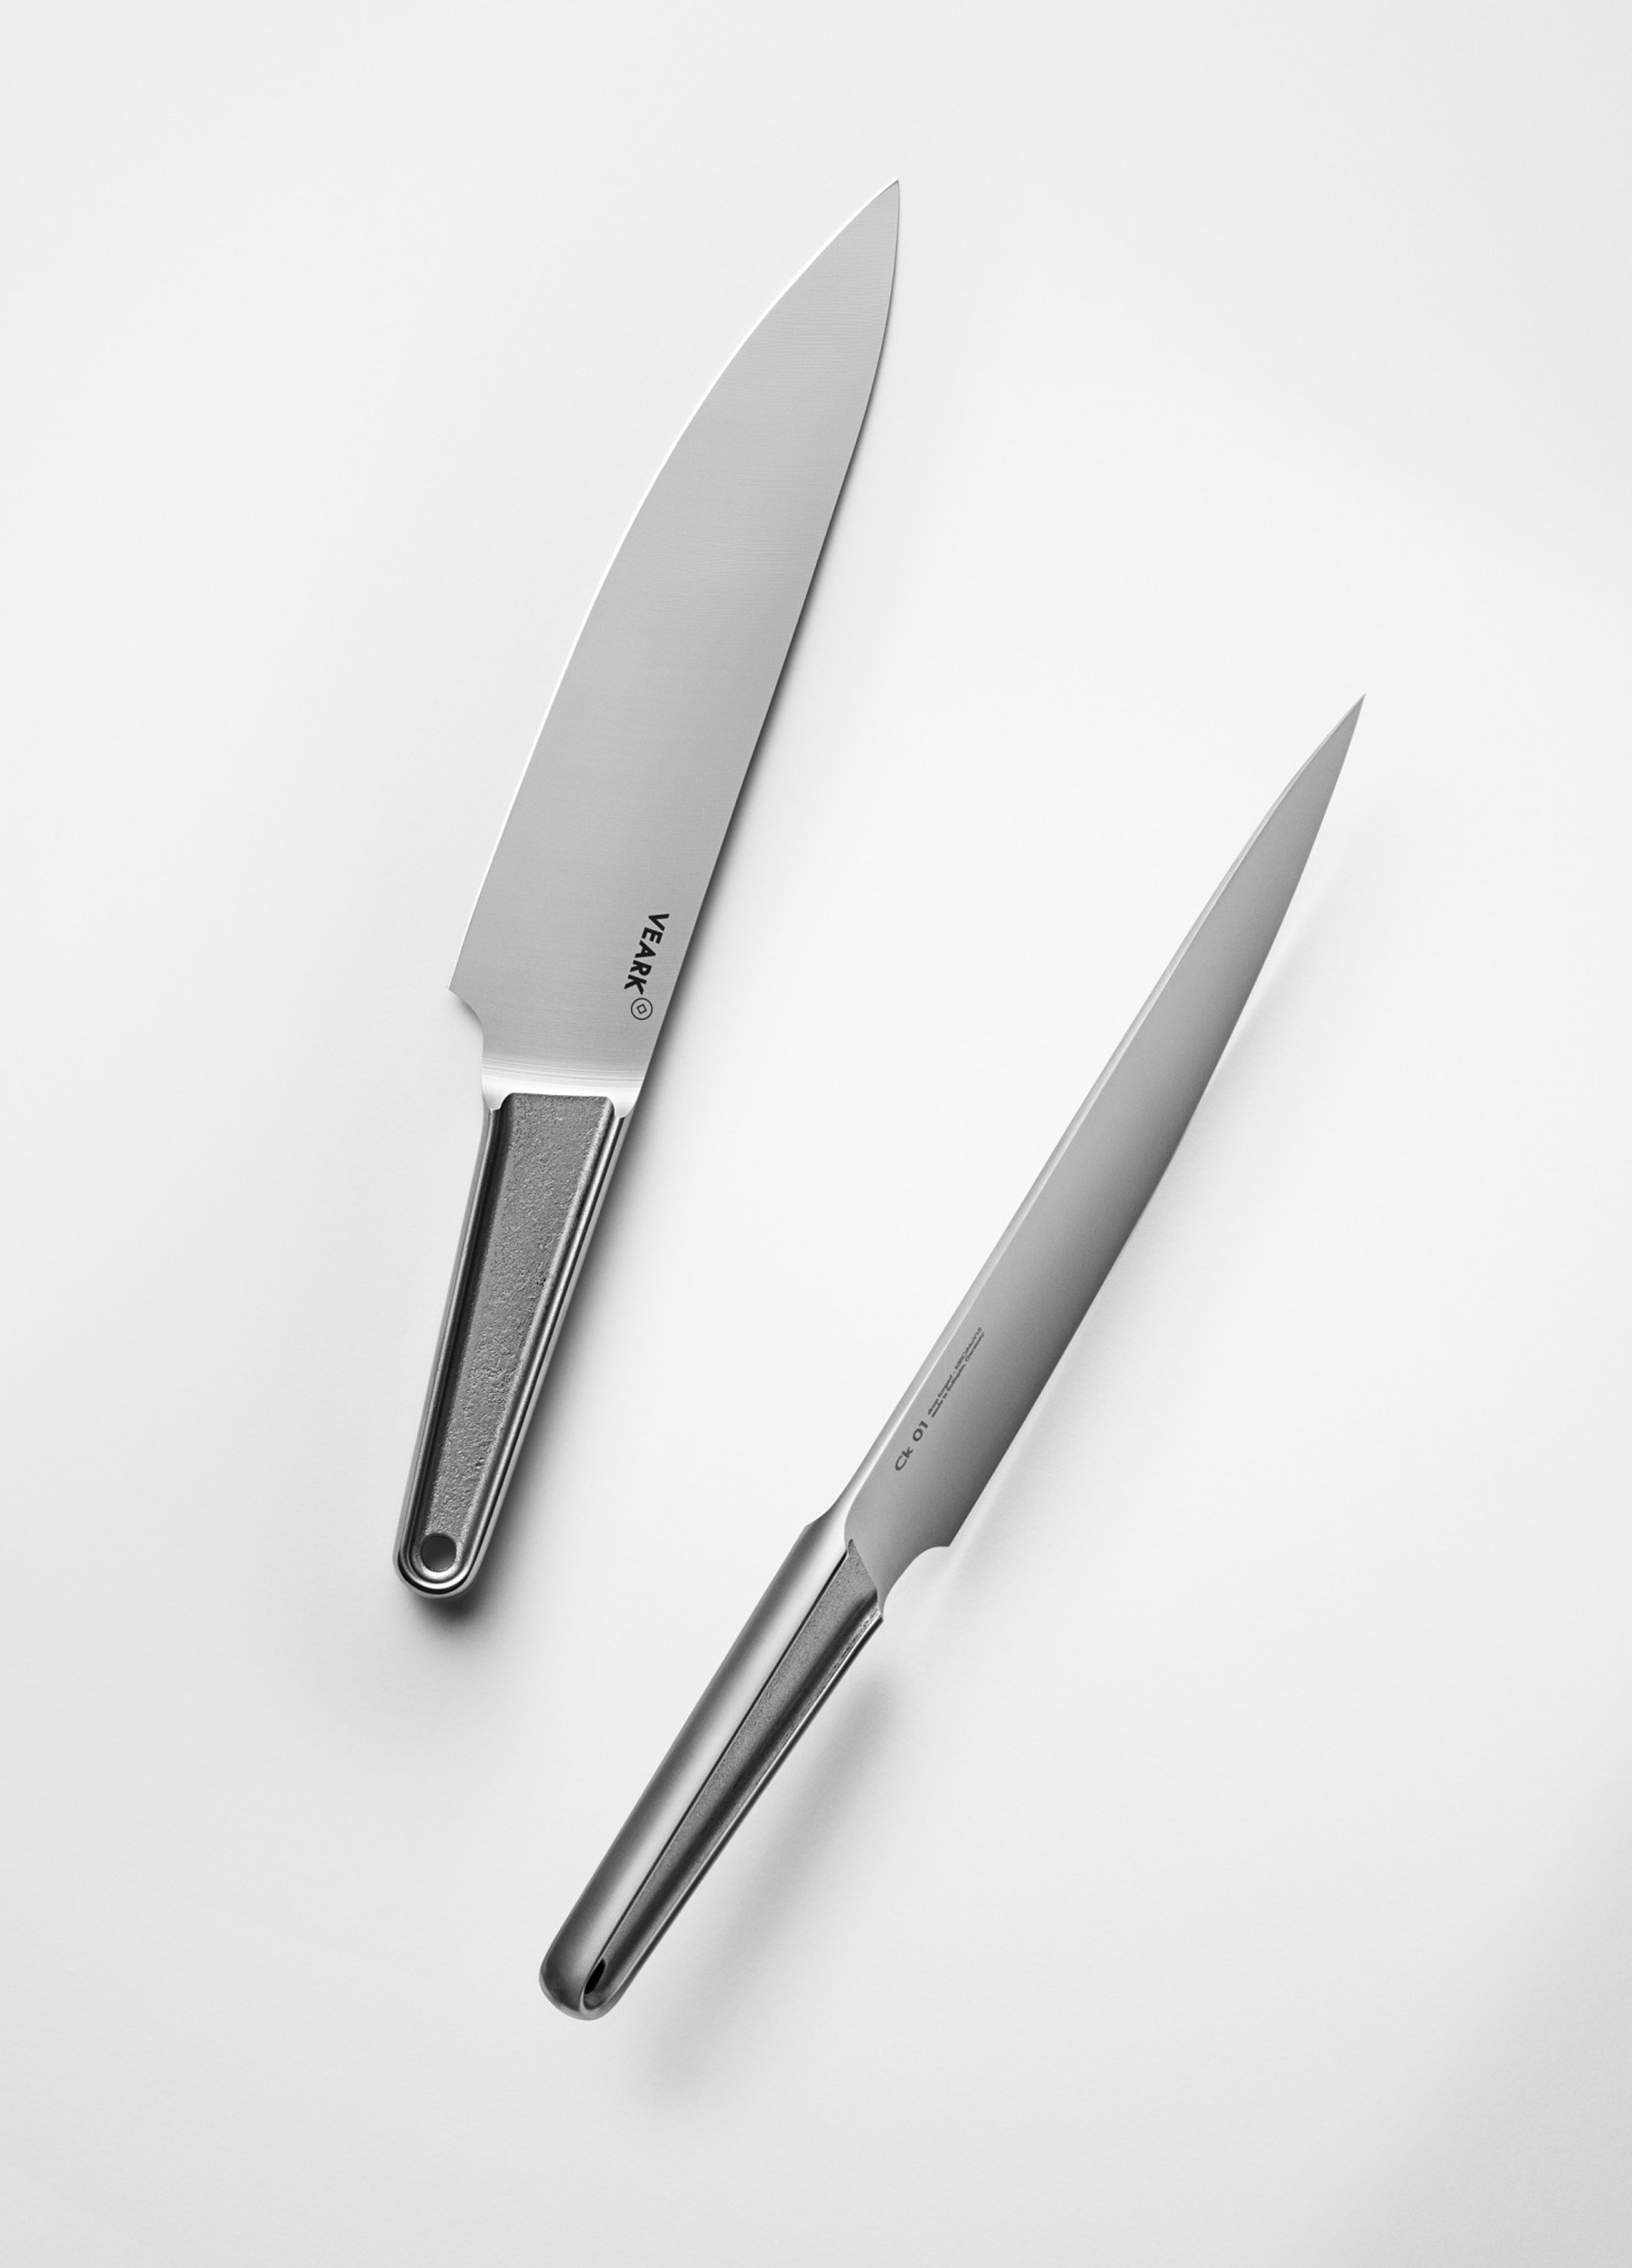 CK01 knife by Veark